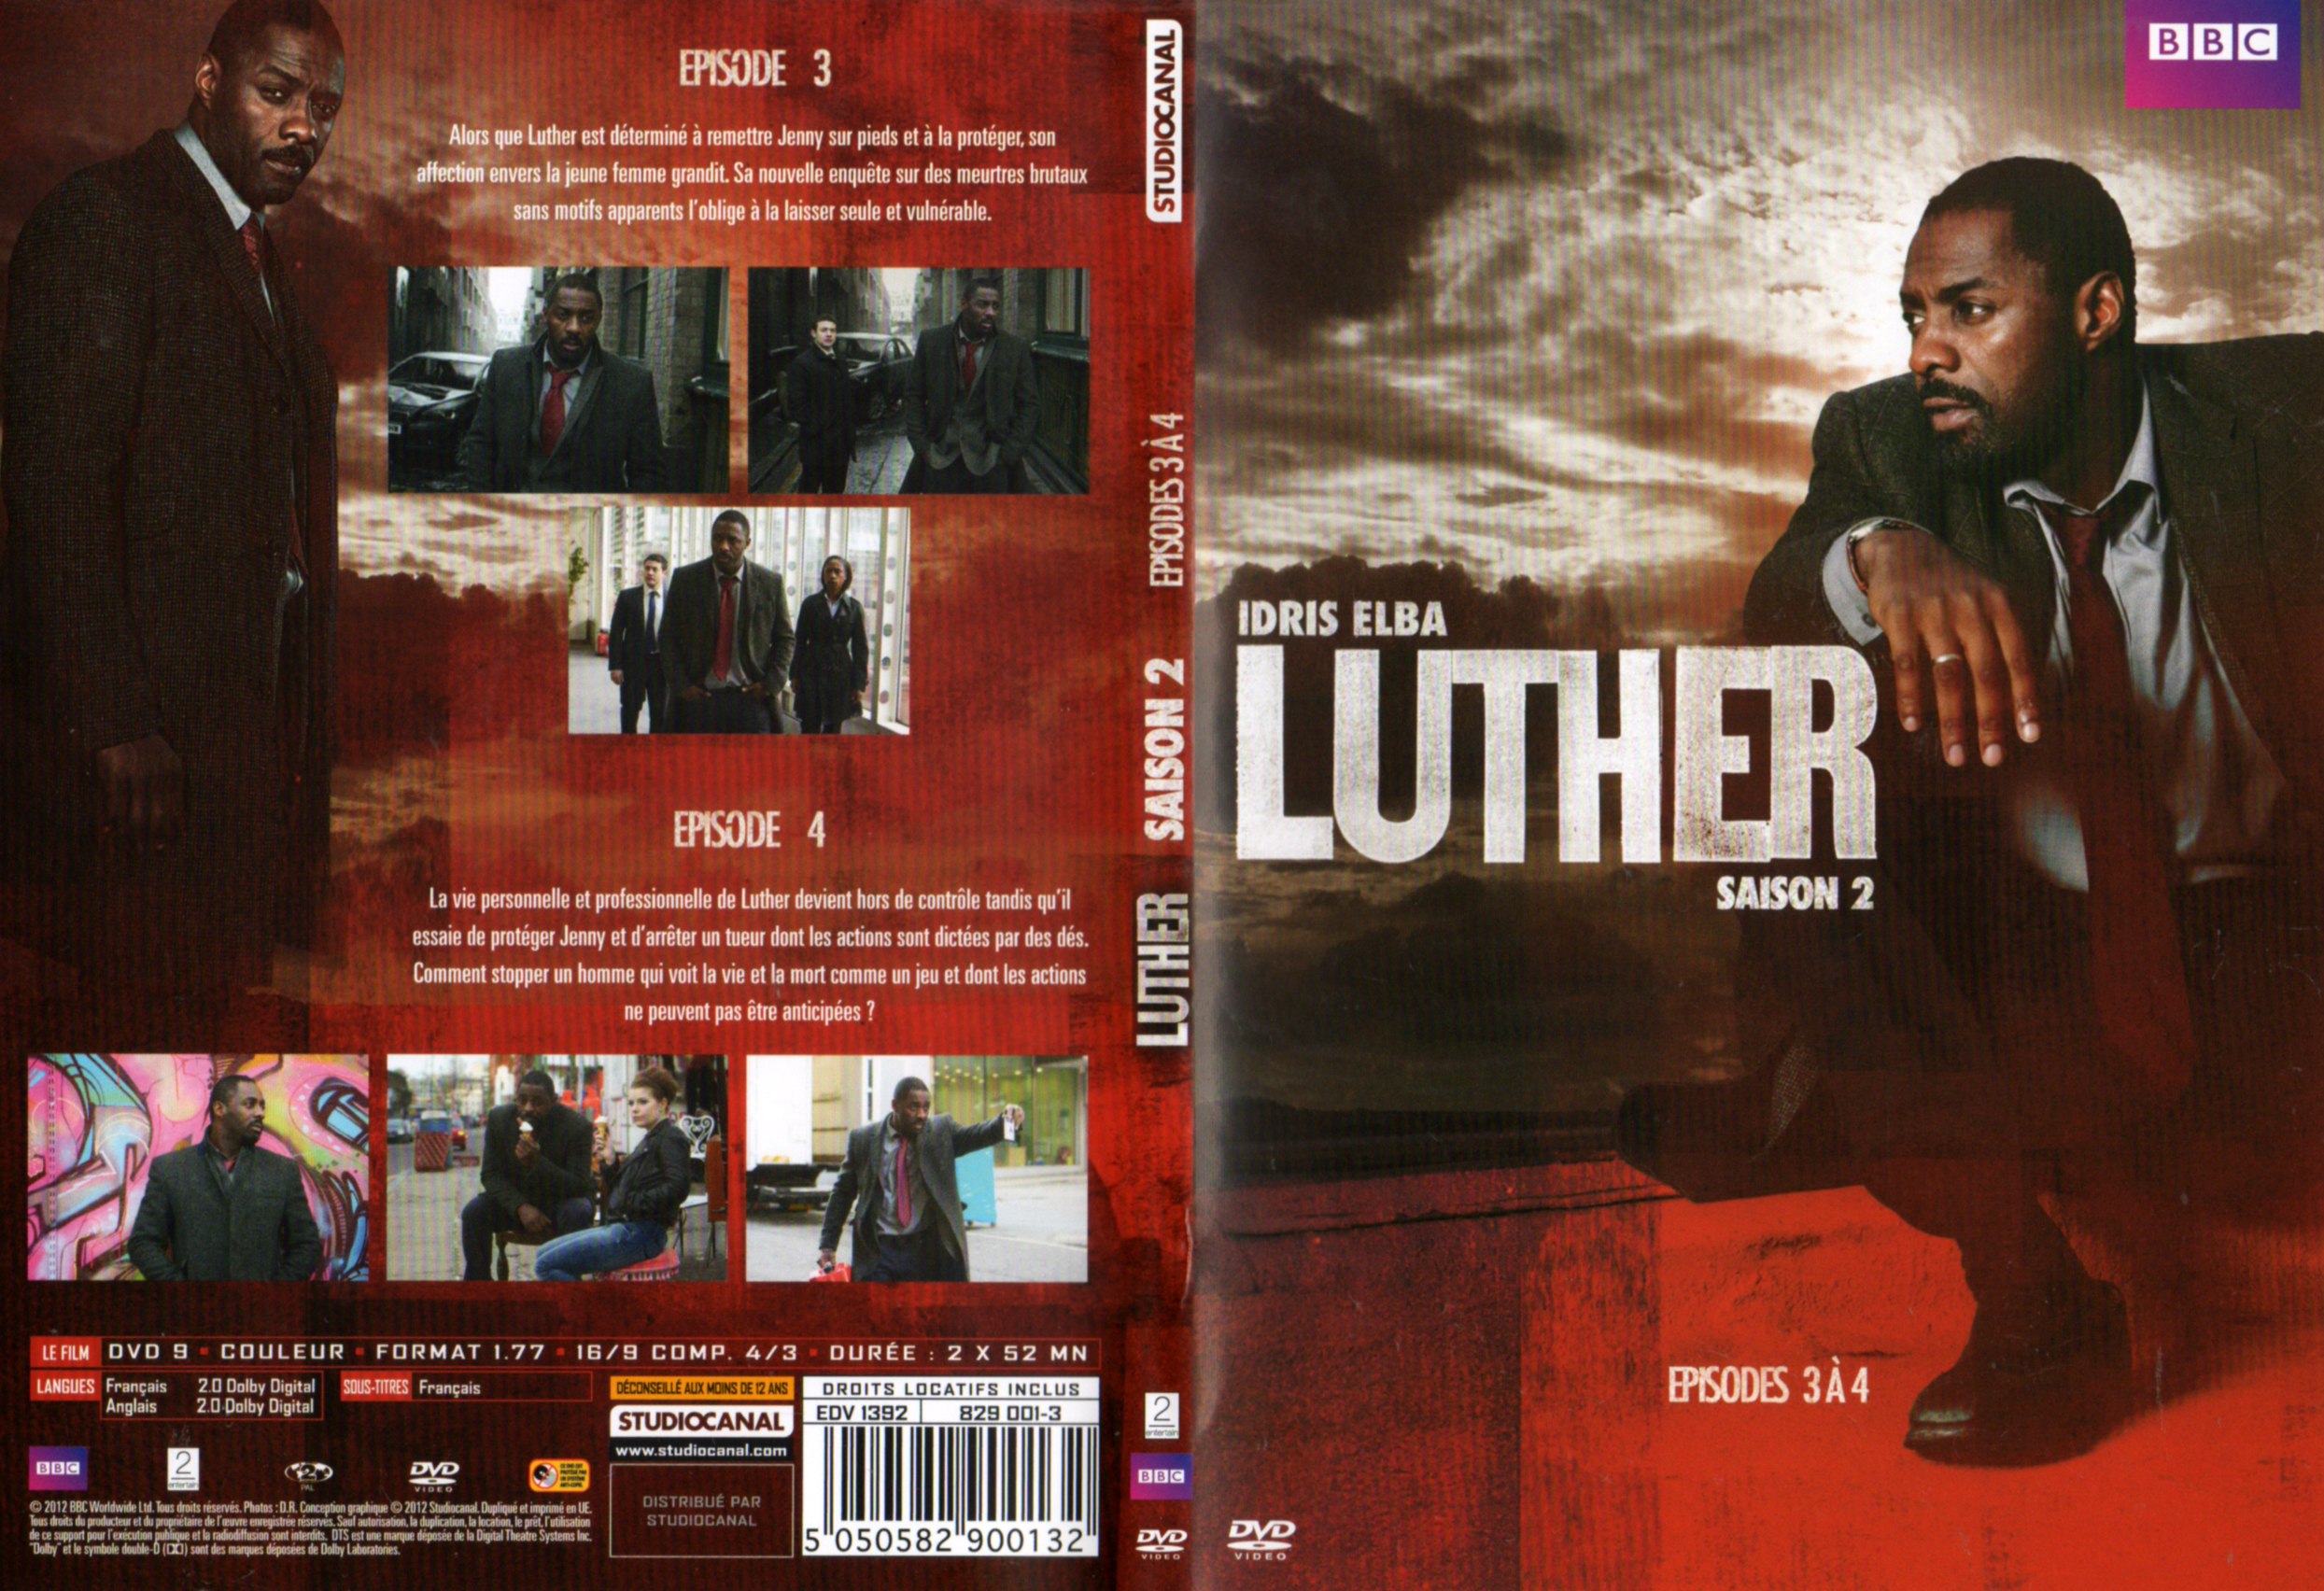 Jaquette DVD Luther Saison 2 Ep 3-4